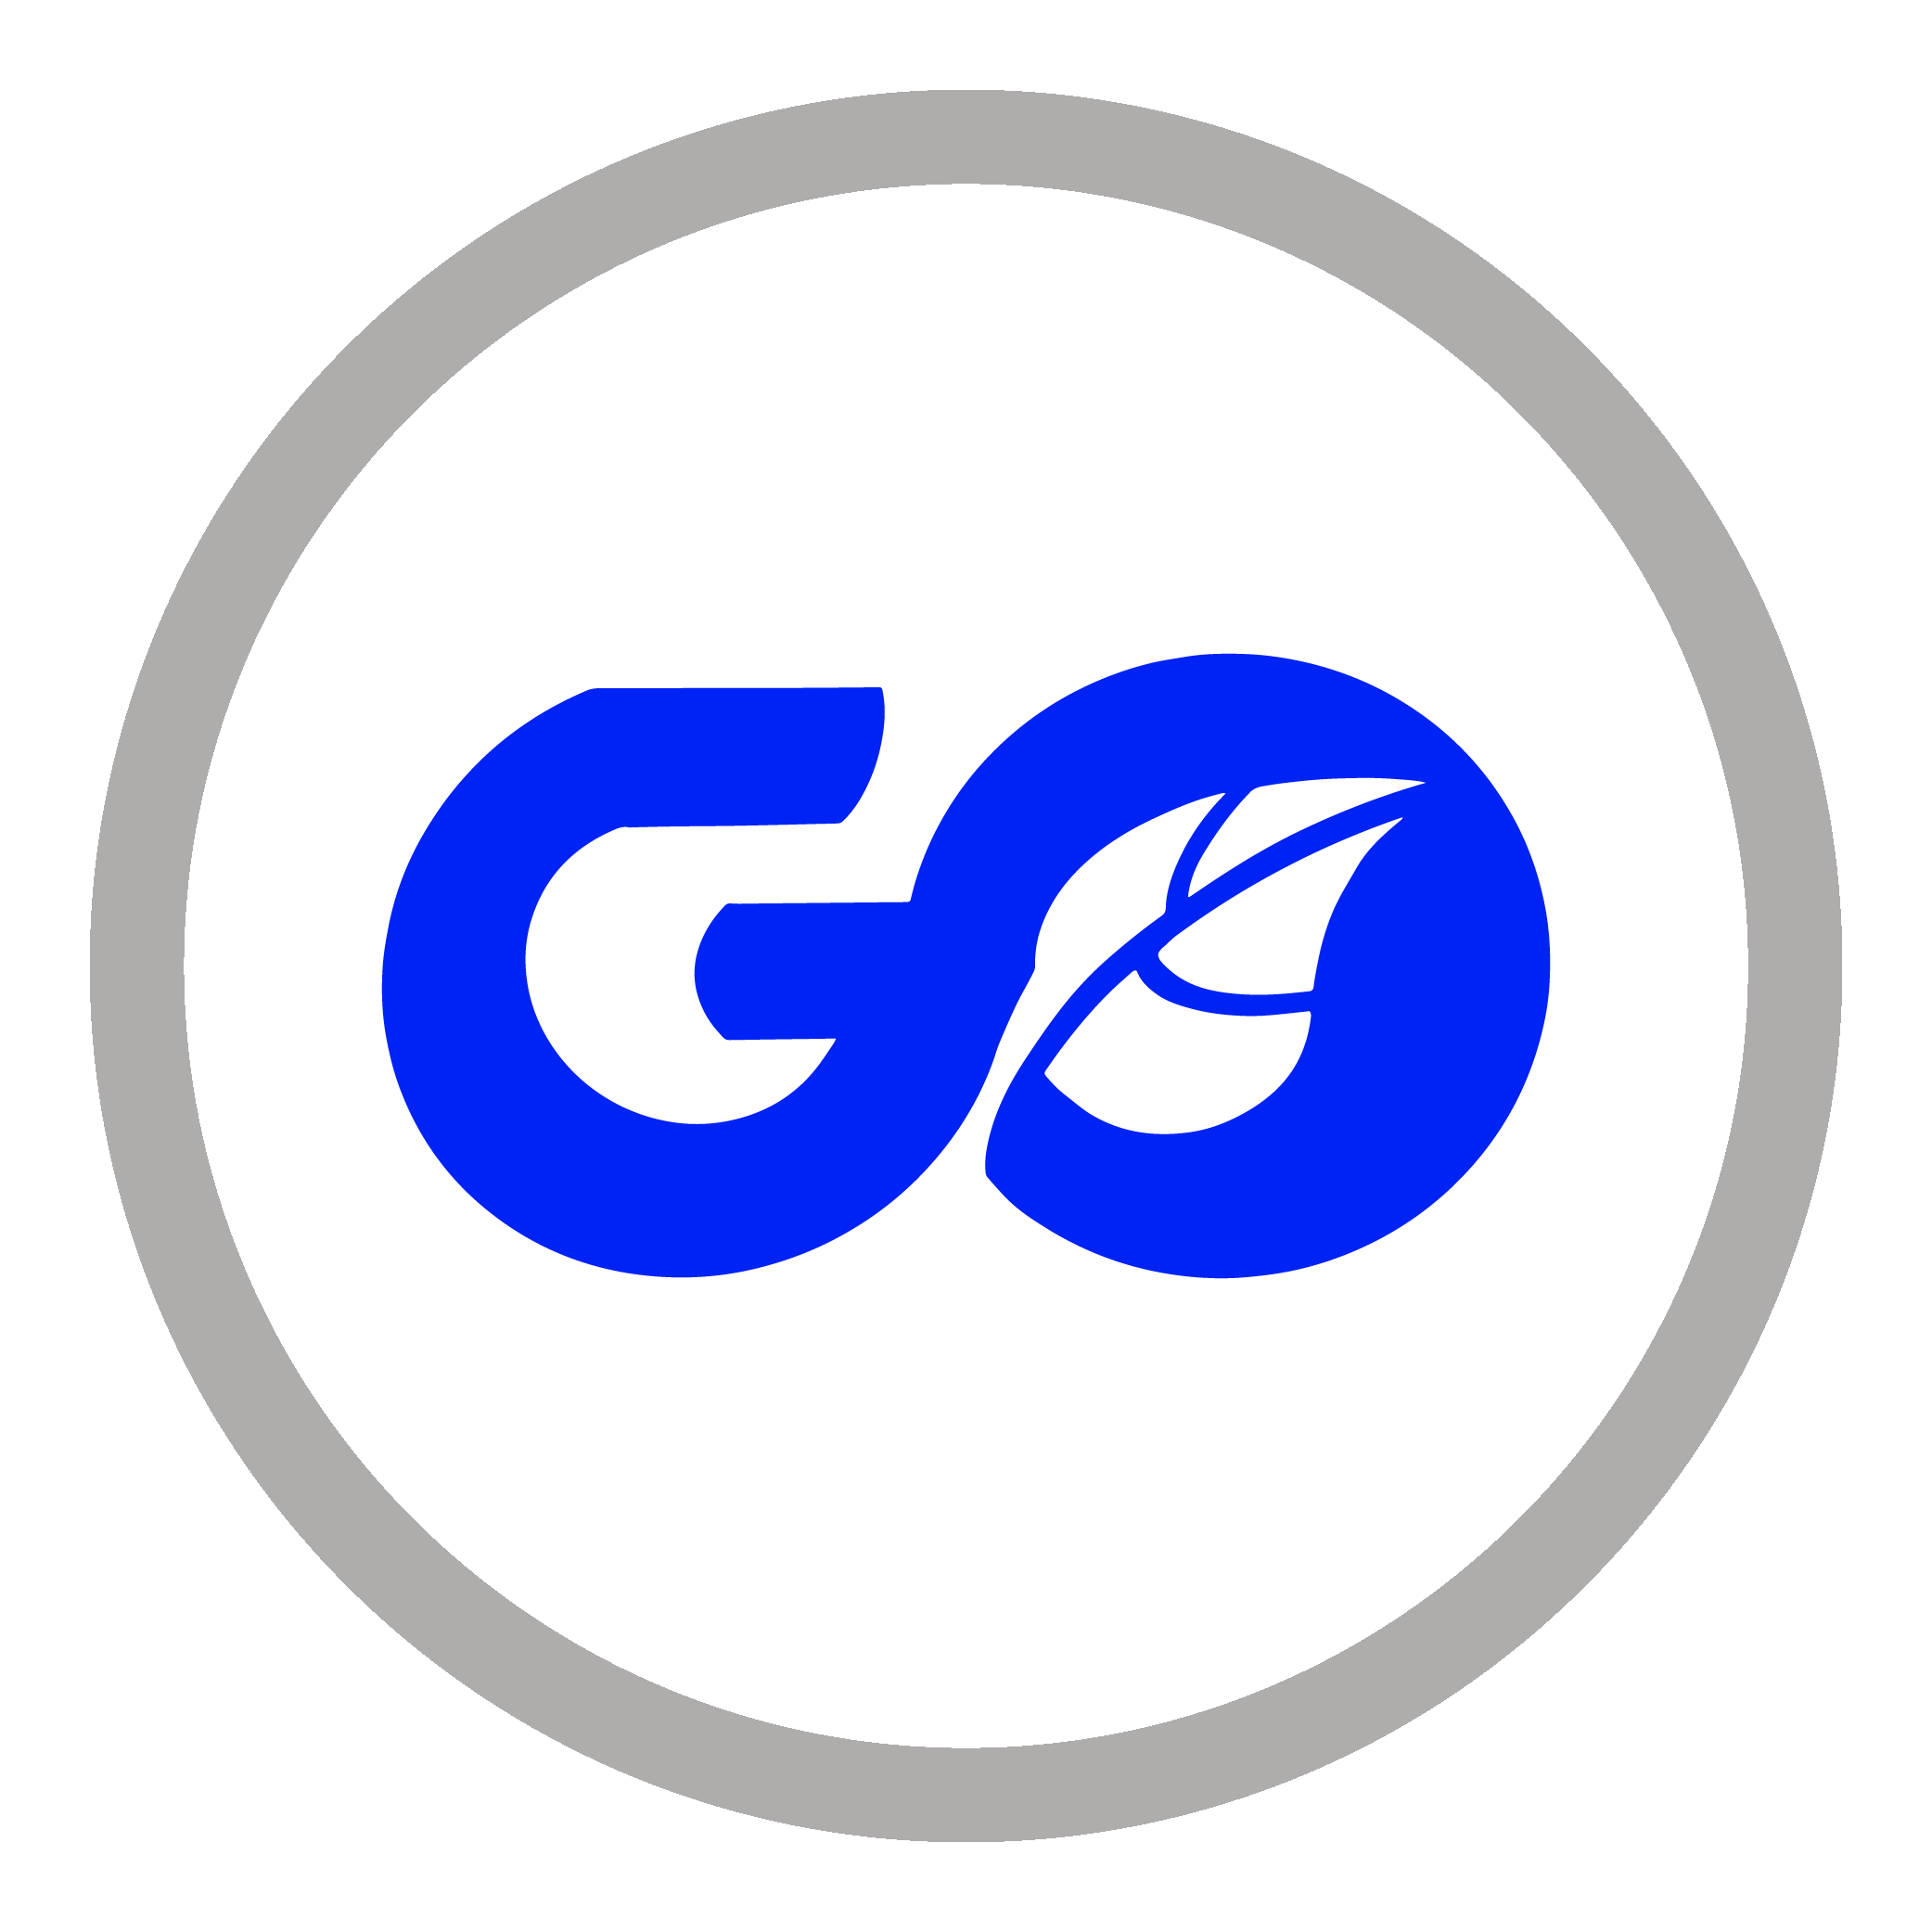 GO logo - Idle.png